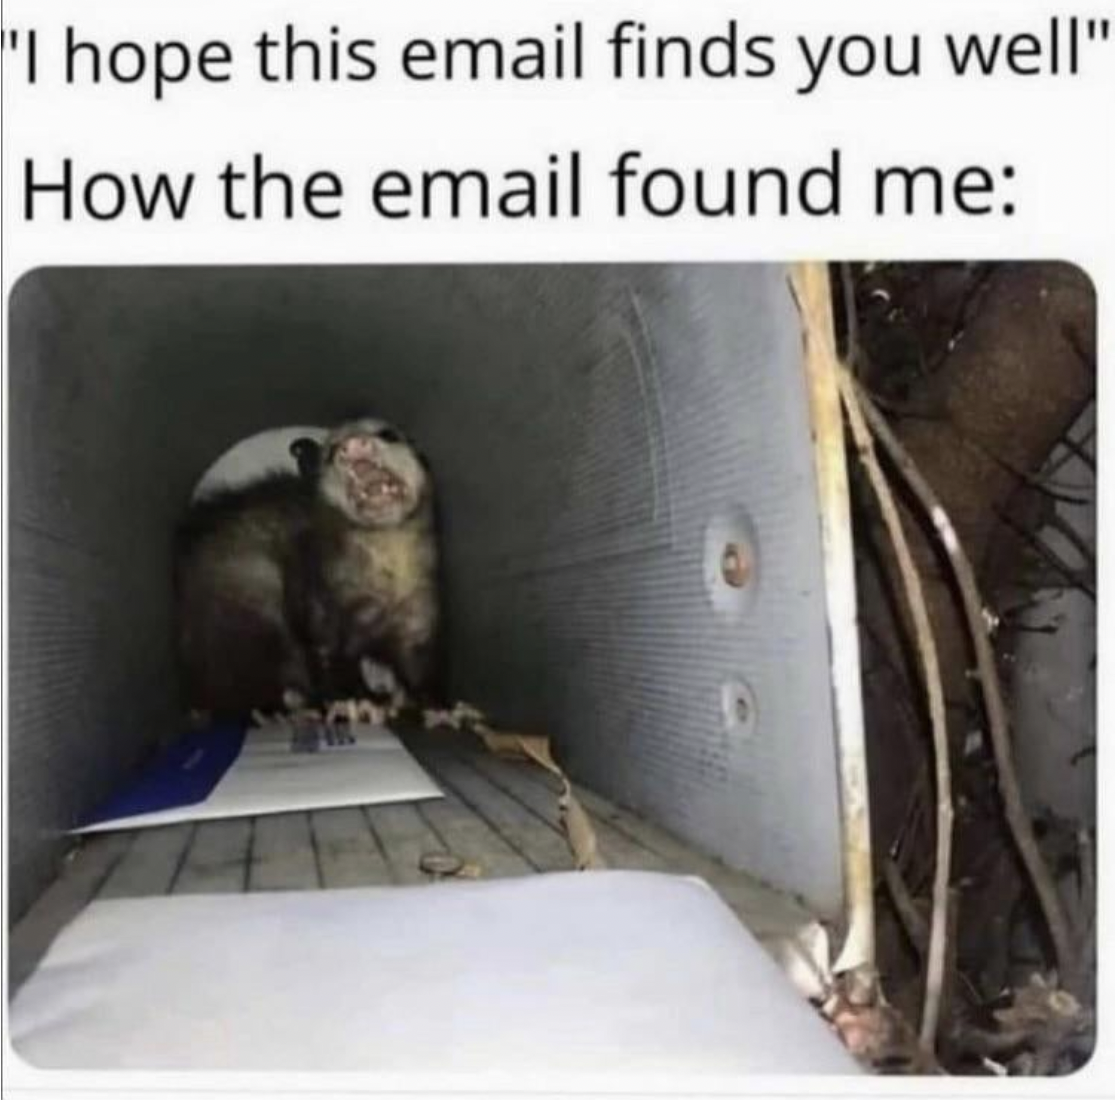 email found me possum - "I hope this email finds you well" How the email found me